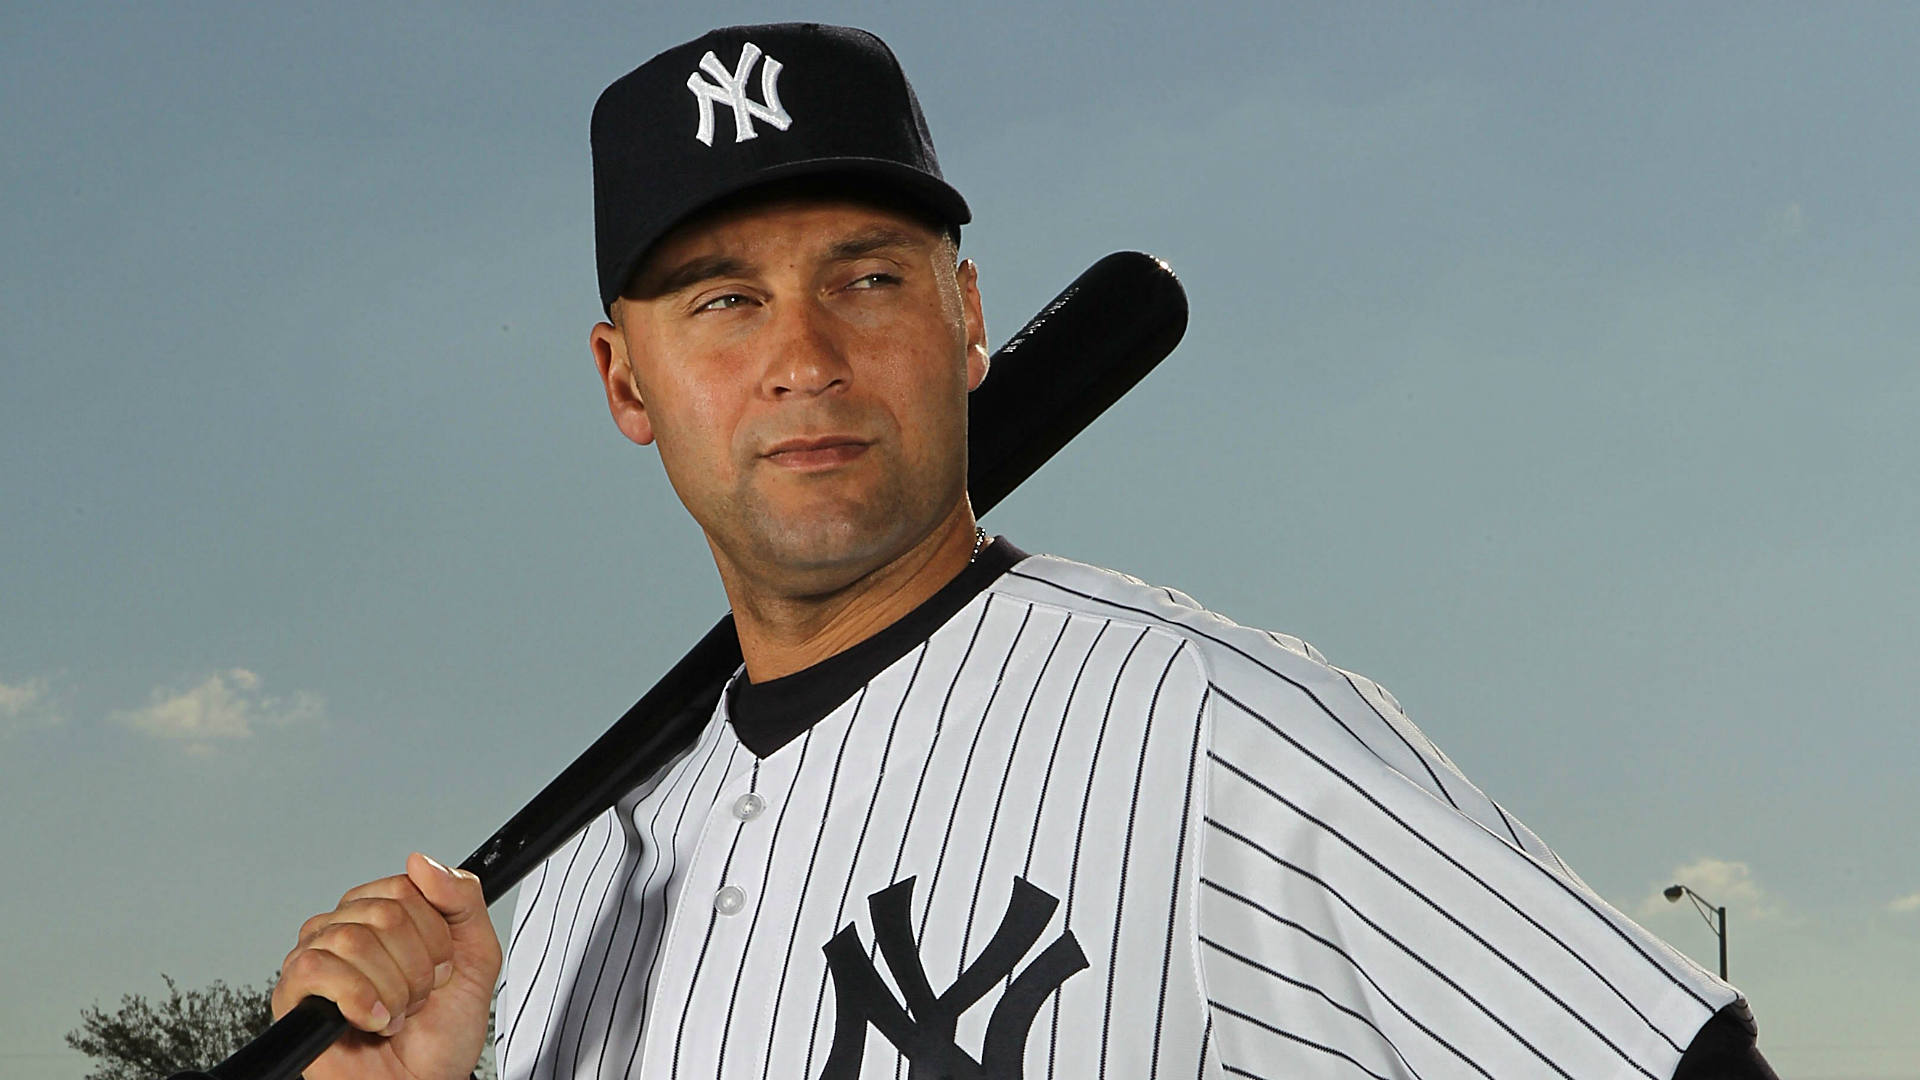 Scout who signed Jeter: ‘He was in a class by himself’ | Sporting News